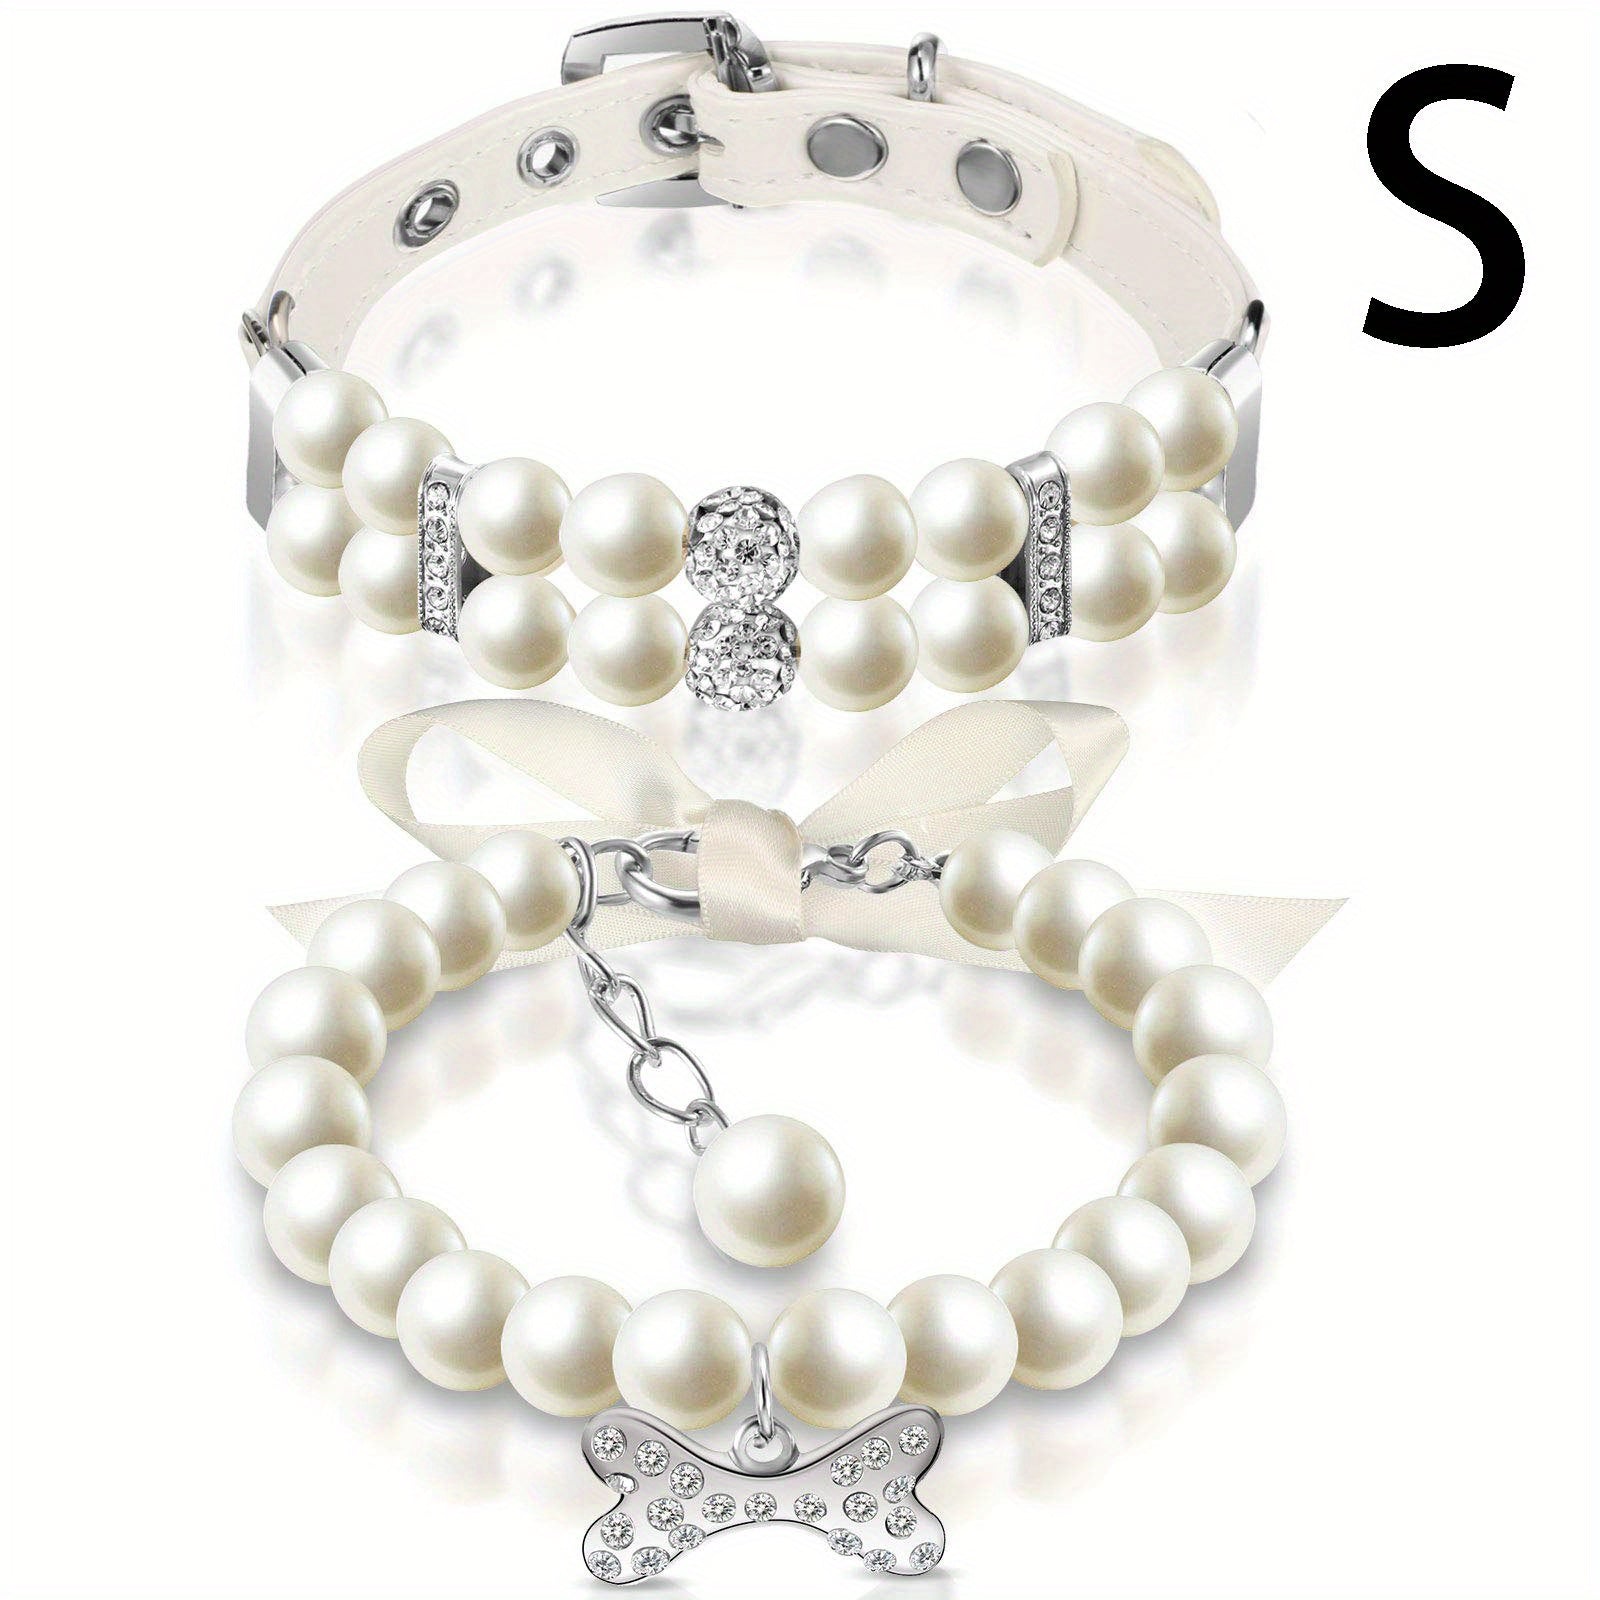 2pcs Small Dog Cat Pearl Collars And PET Pearl Necklace Set Cute Fashion PET Pu Leather Collars Necklace With Crystal Rhinestone For Dogs Cats Puppy Kitten Wedding Birthday Party